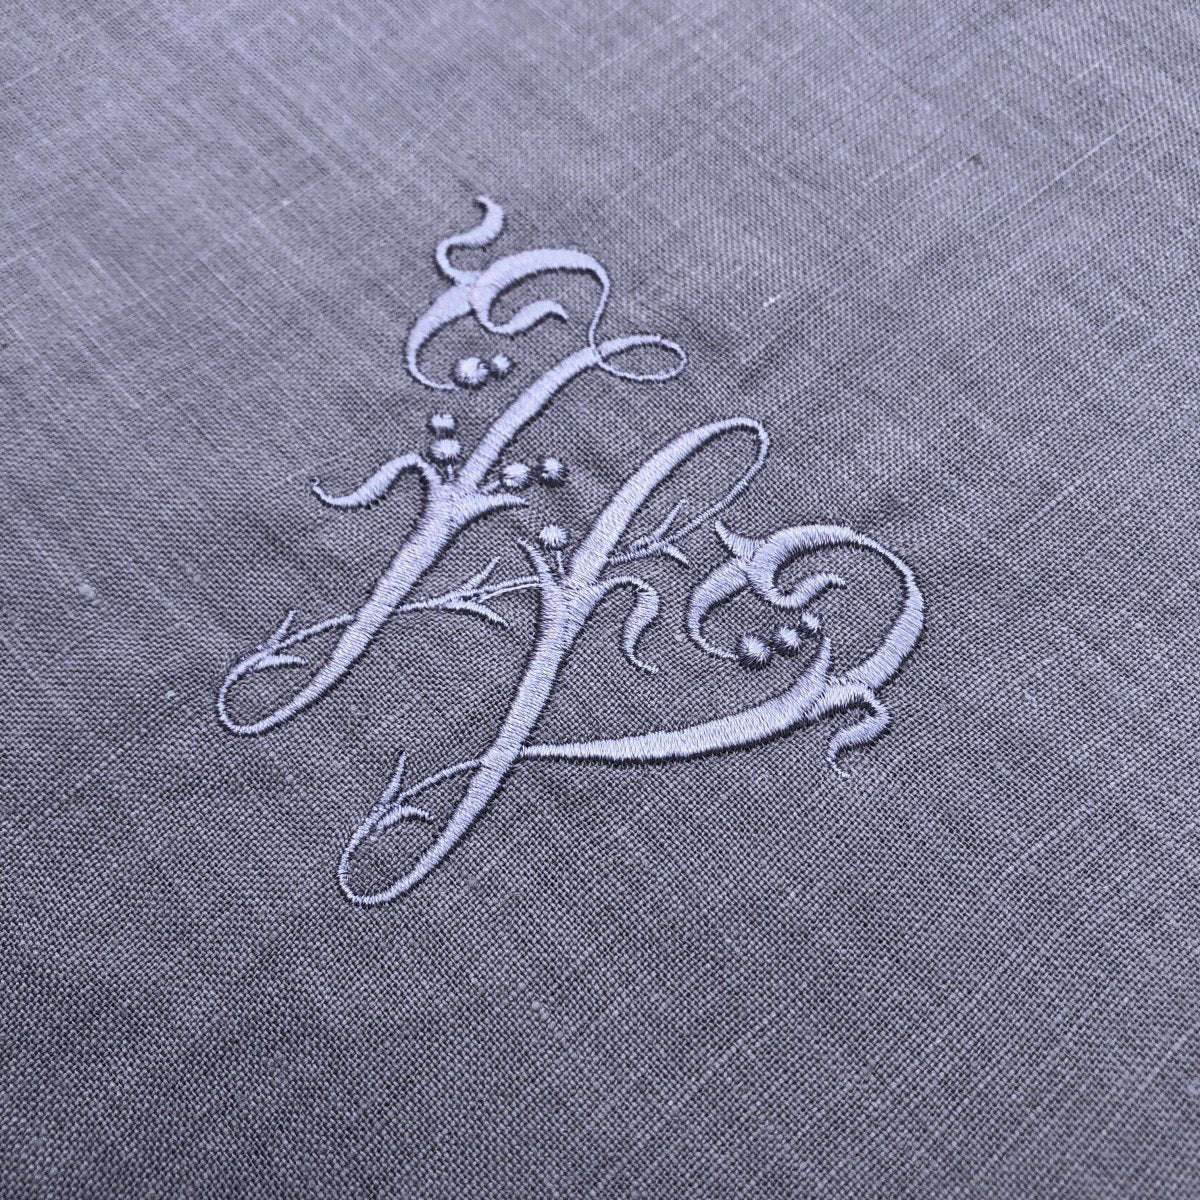 100% Coloured Linen Napkins with Embroidered Silky French Monogram - Linen and Letters